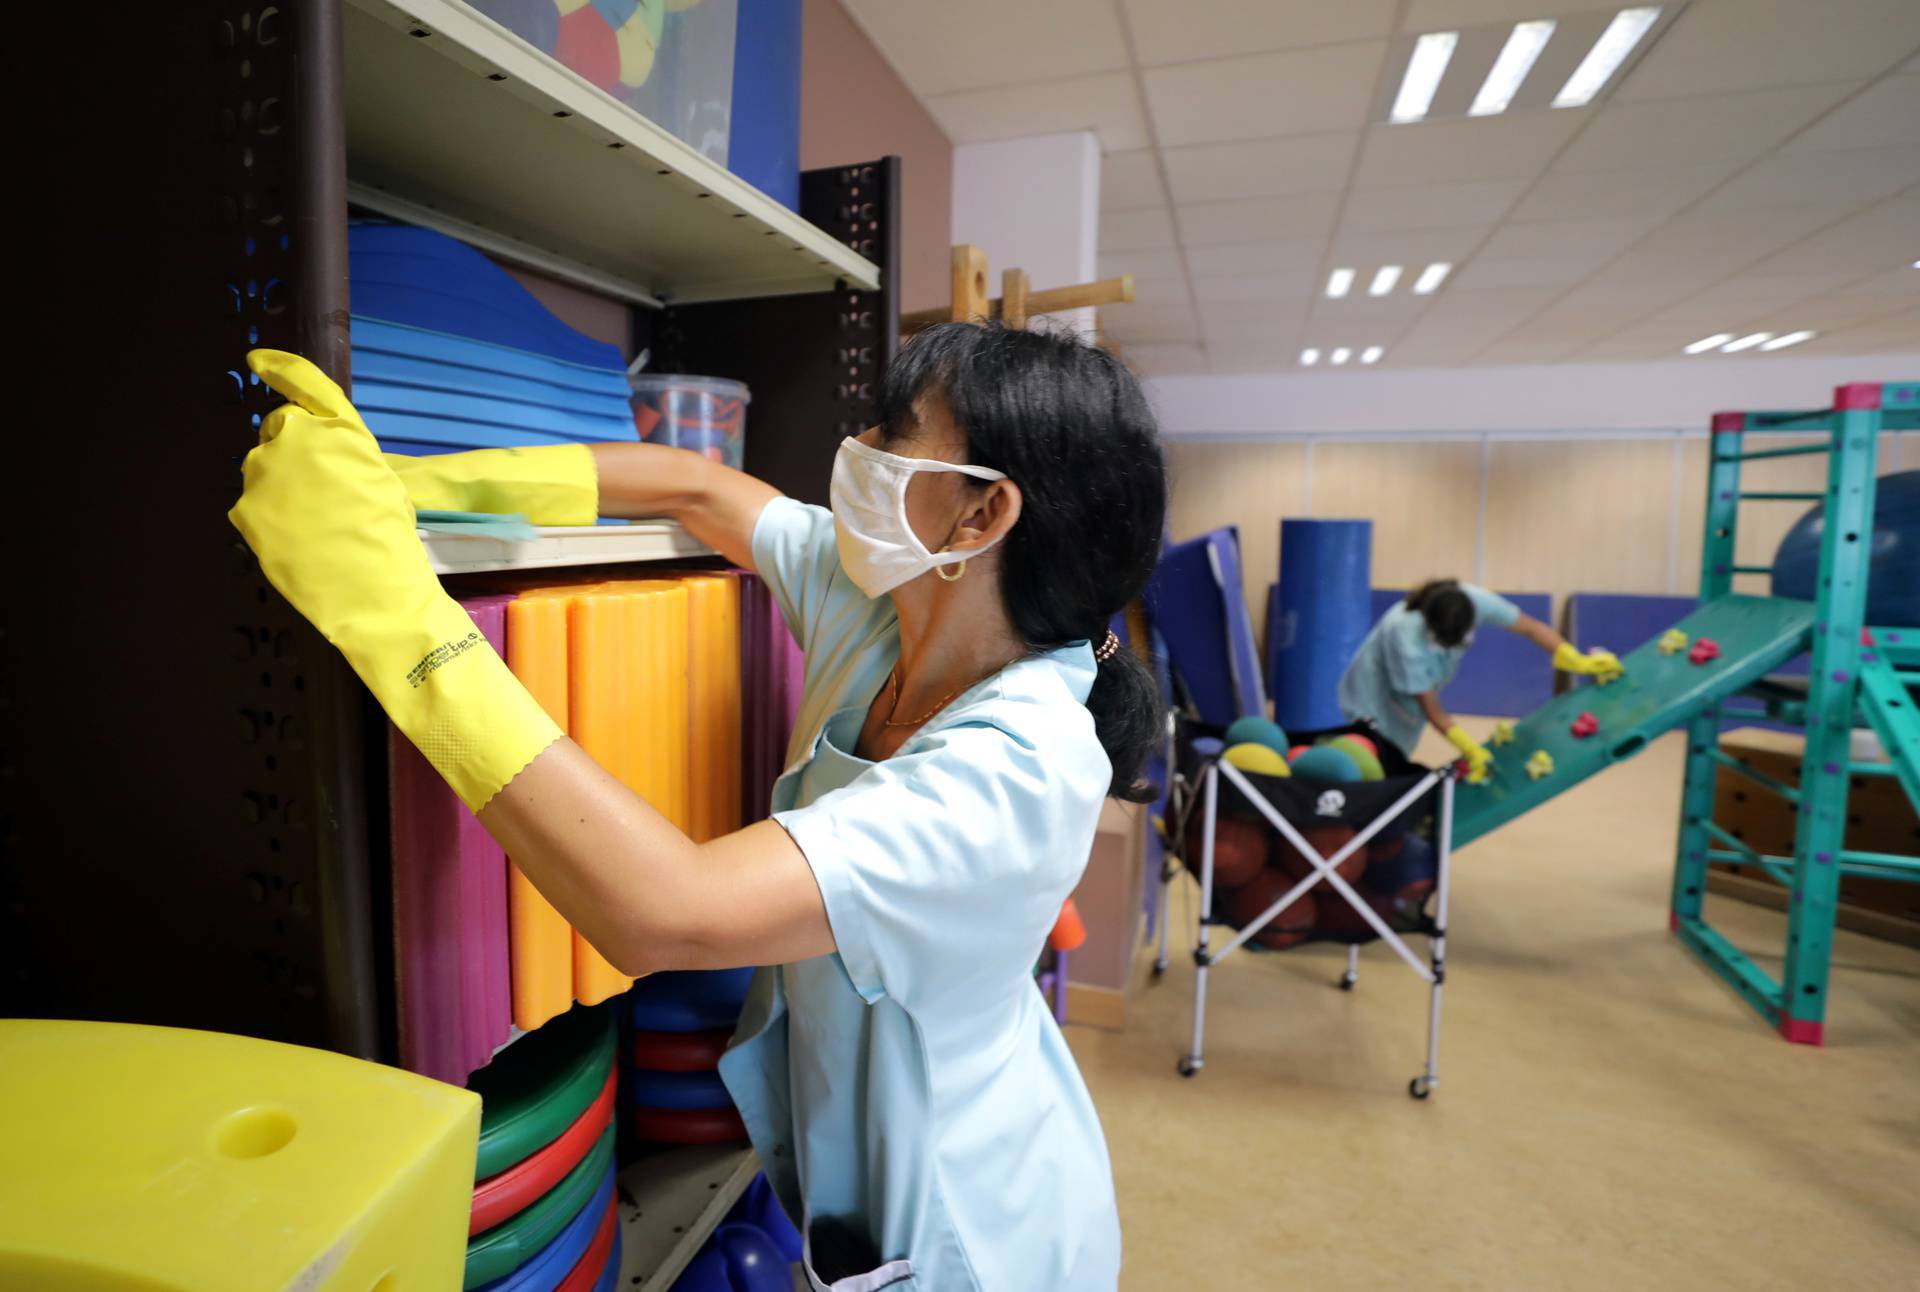 Municipal employees, wearing protective face masks, clean a playroom at a primary school in Le Cannet